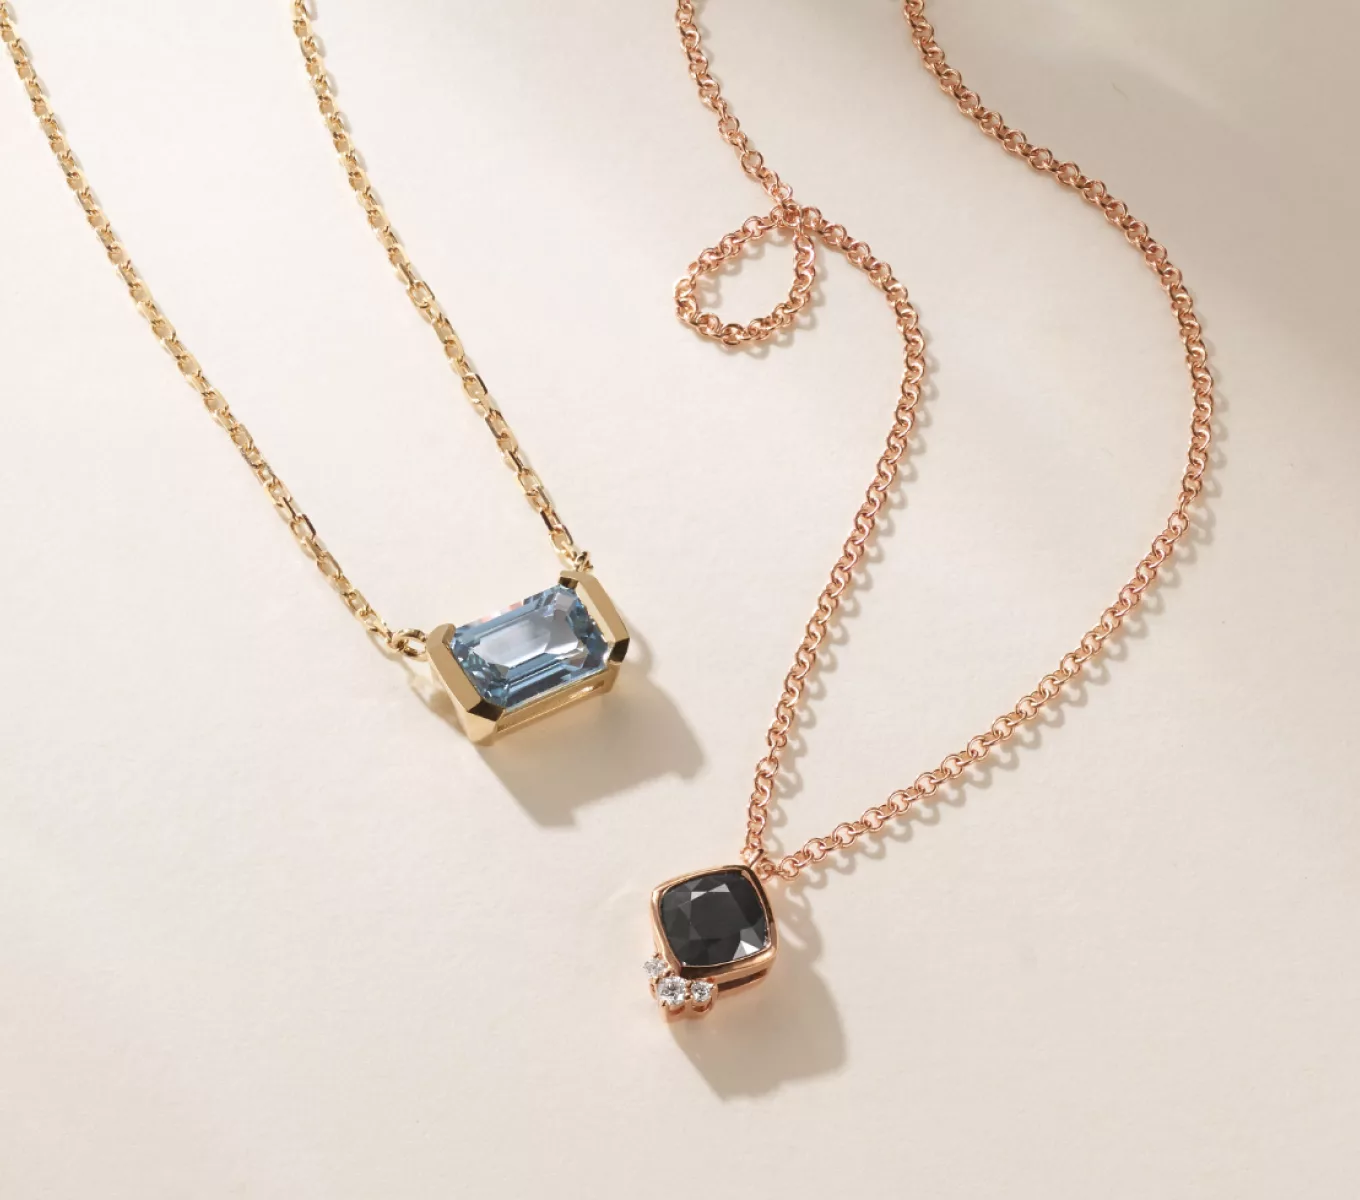 Image of Dorset Teal Sapphire Pendant in 14K Yellow Gold, Lynx Black Sapphire and Diamond Necklace in 14K Rose Gold